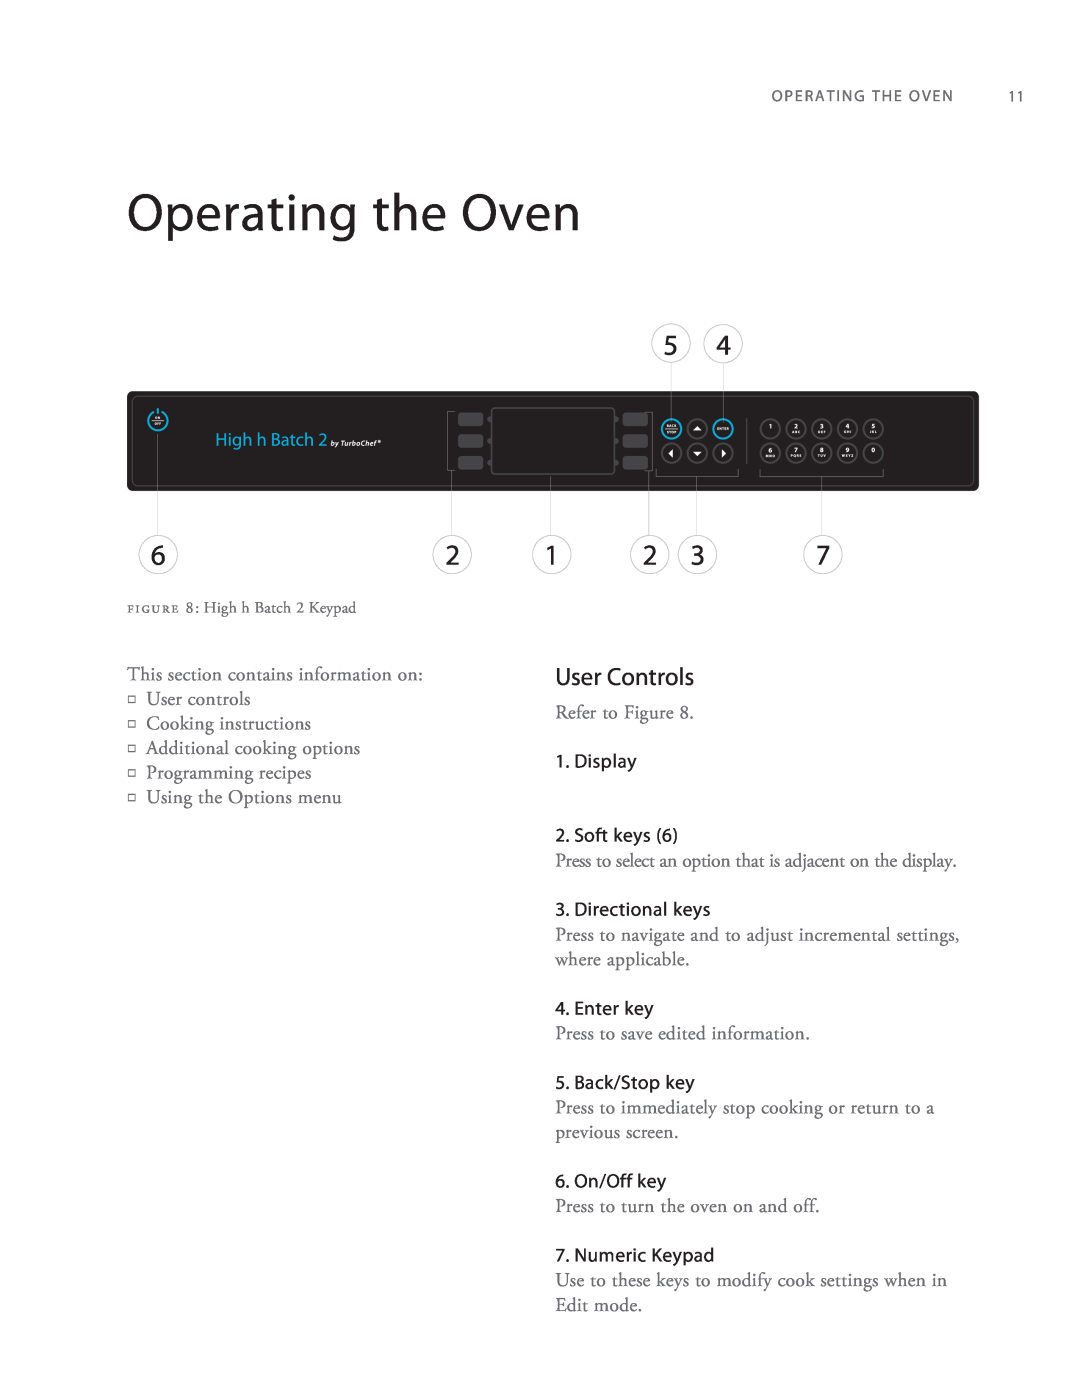 Turbo Chef Technologies 2TM manual Operating the Oven, User Controls 